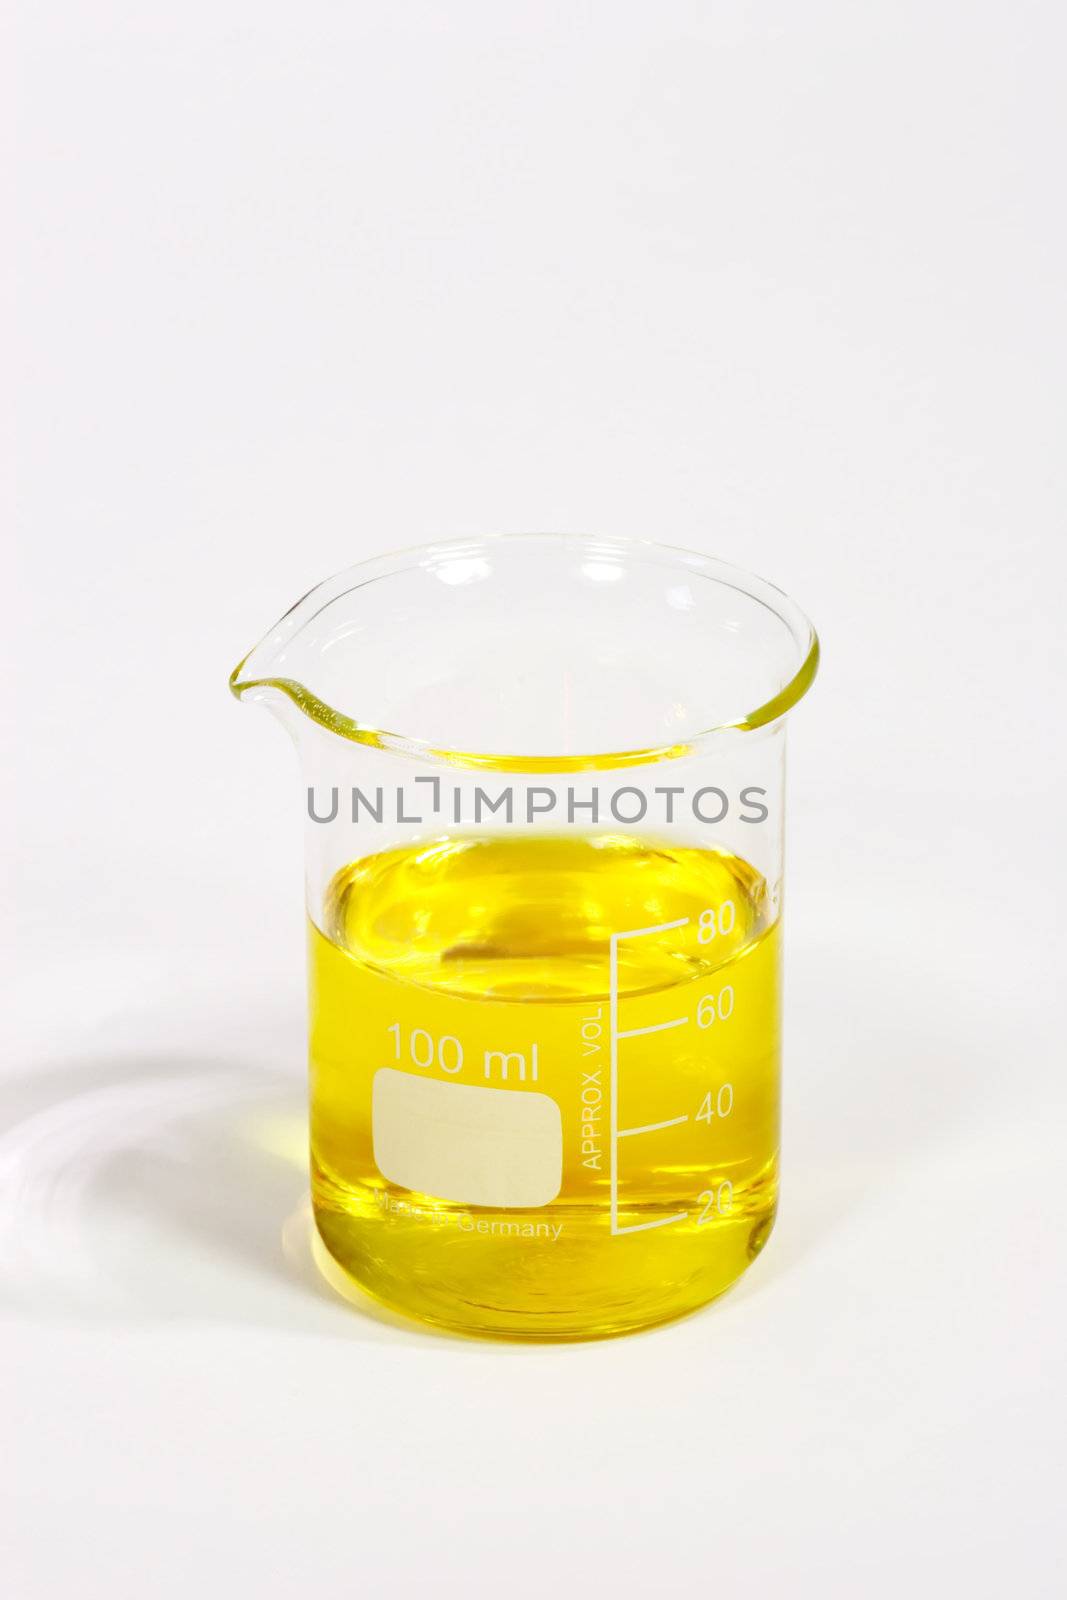 Graduated beaker with yellow fluid on bright background